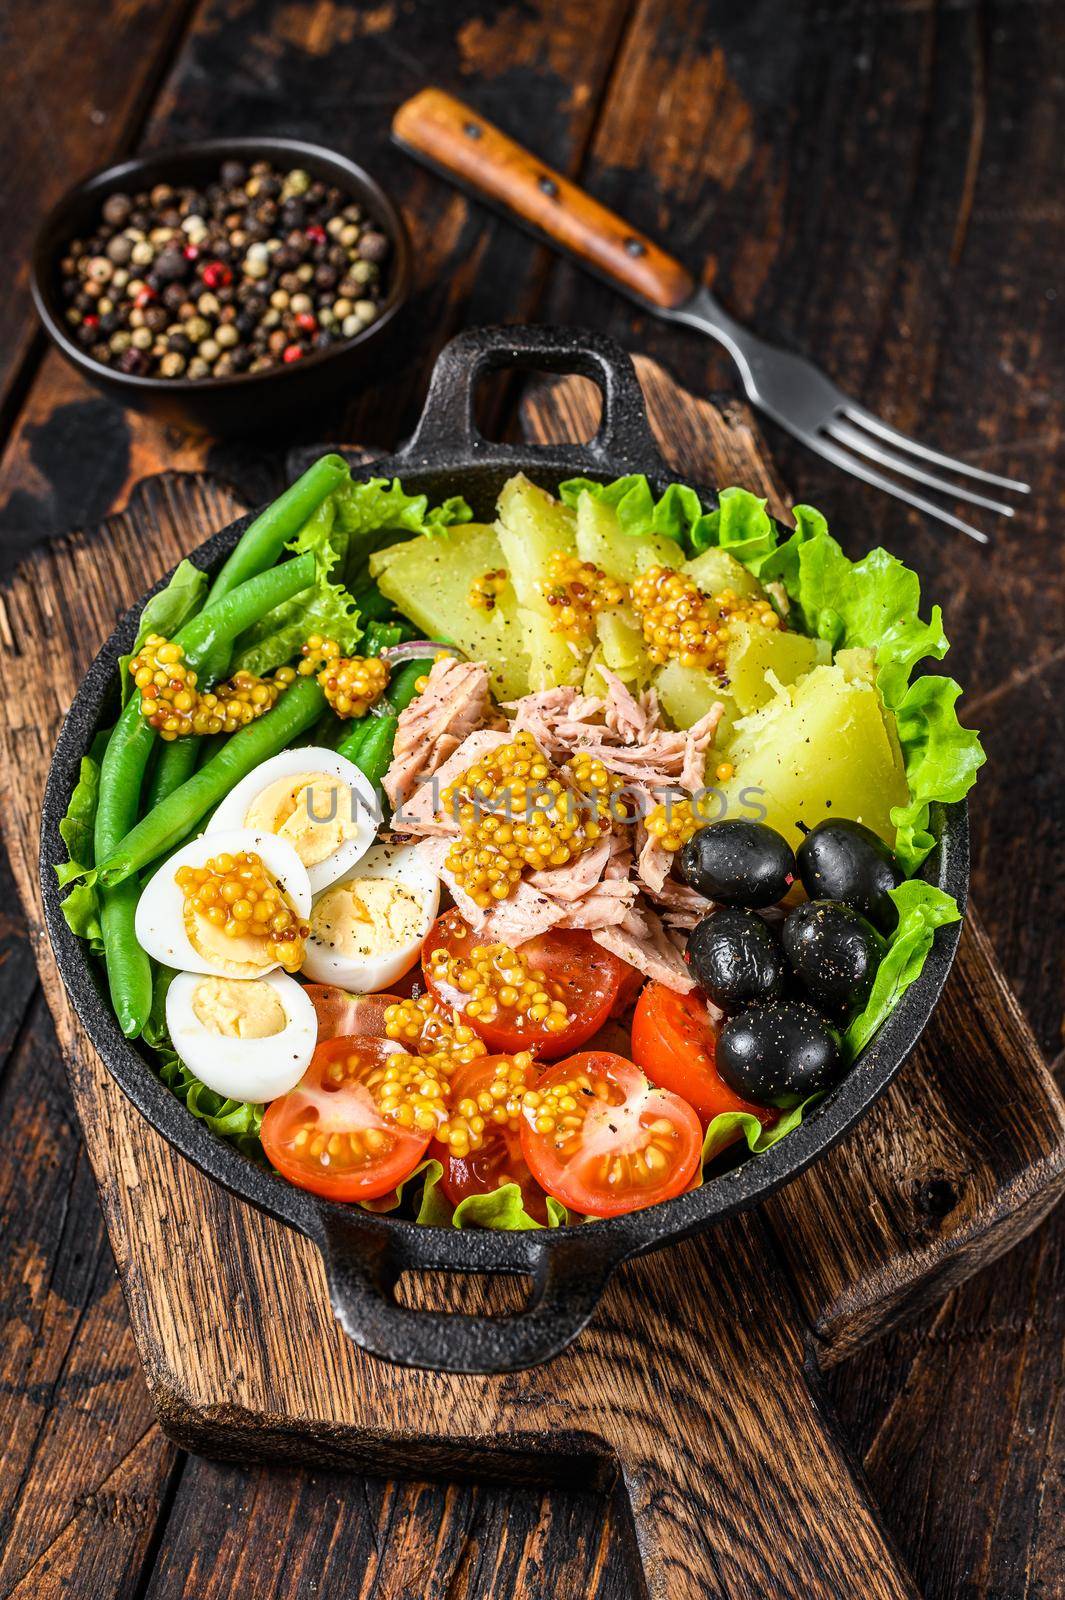 Nicoise salad with tuna, cherry tomatoes, olives, green beans, cucumber, soft boiled eggs and potato. Dark wooden background. top view.